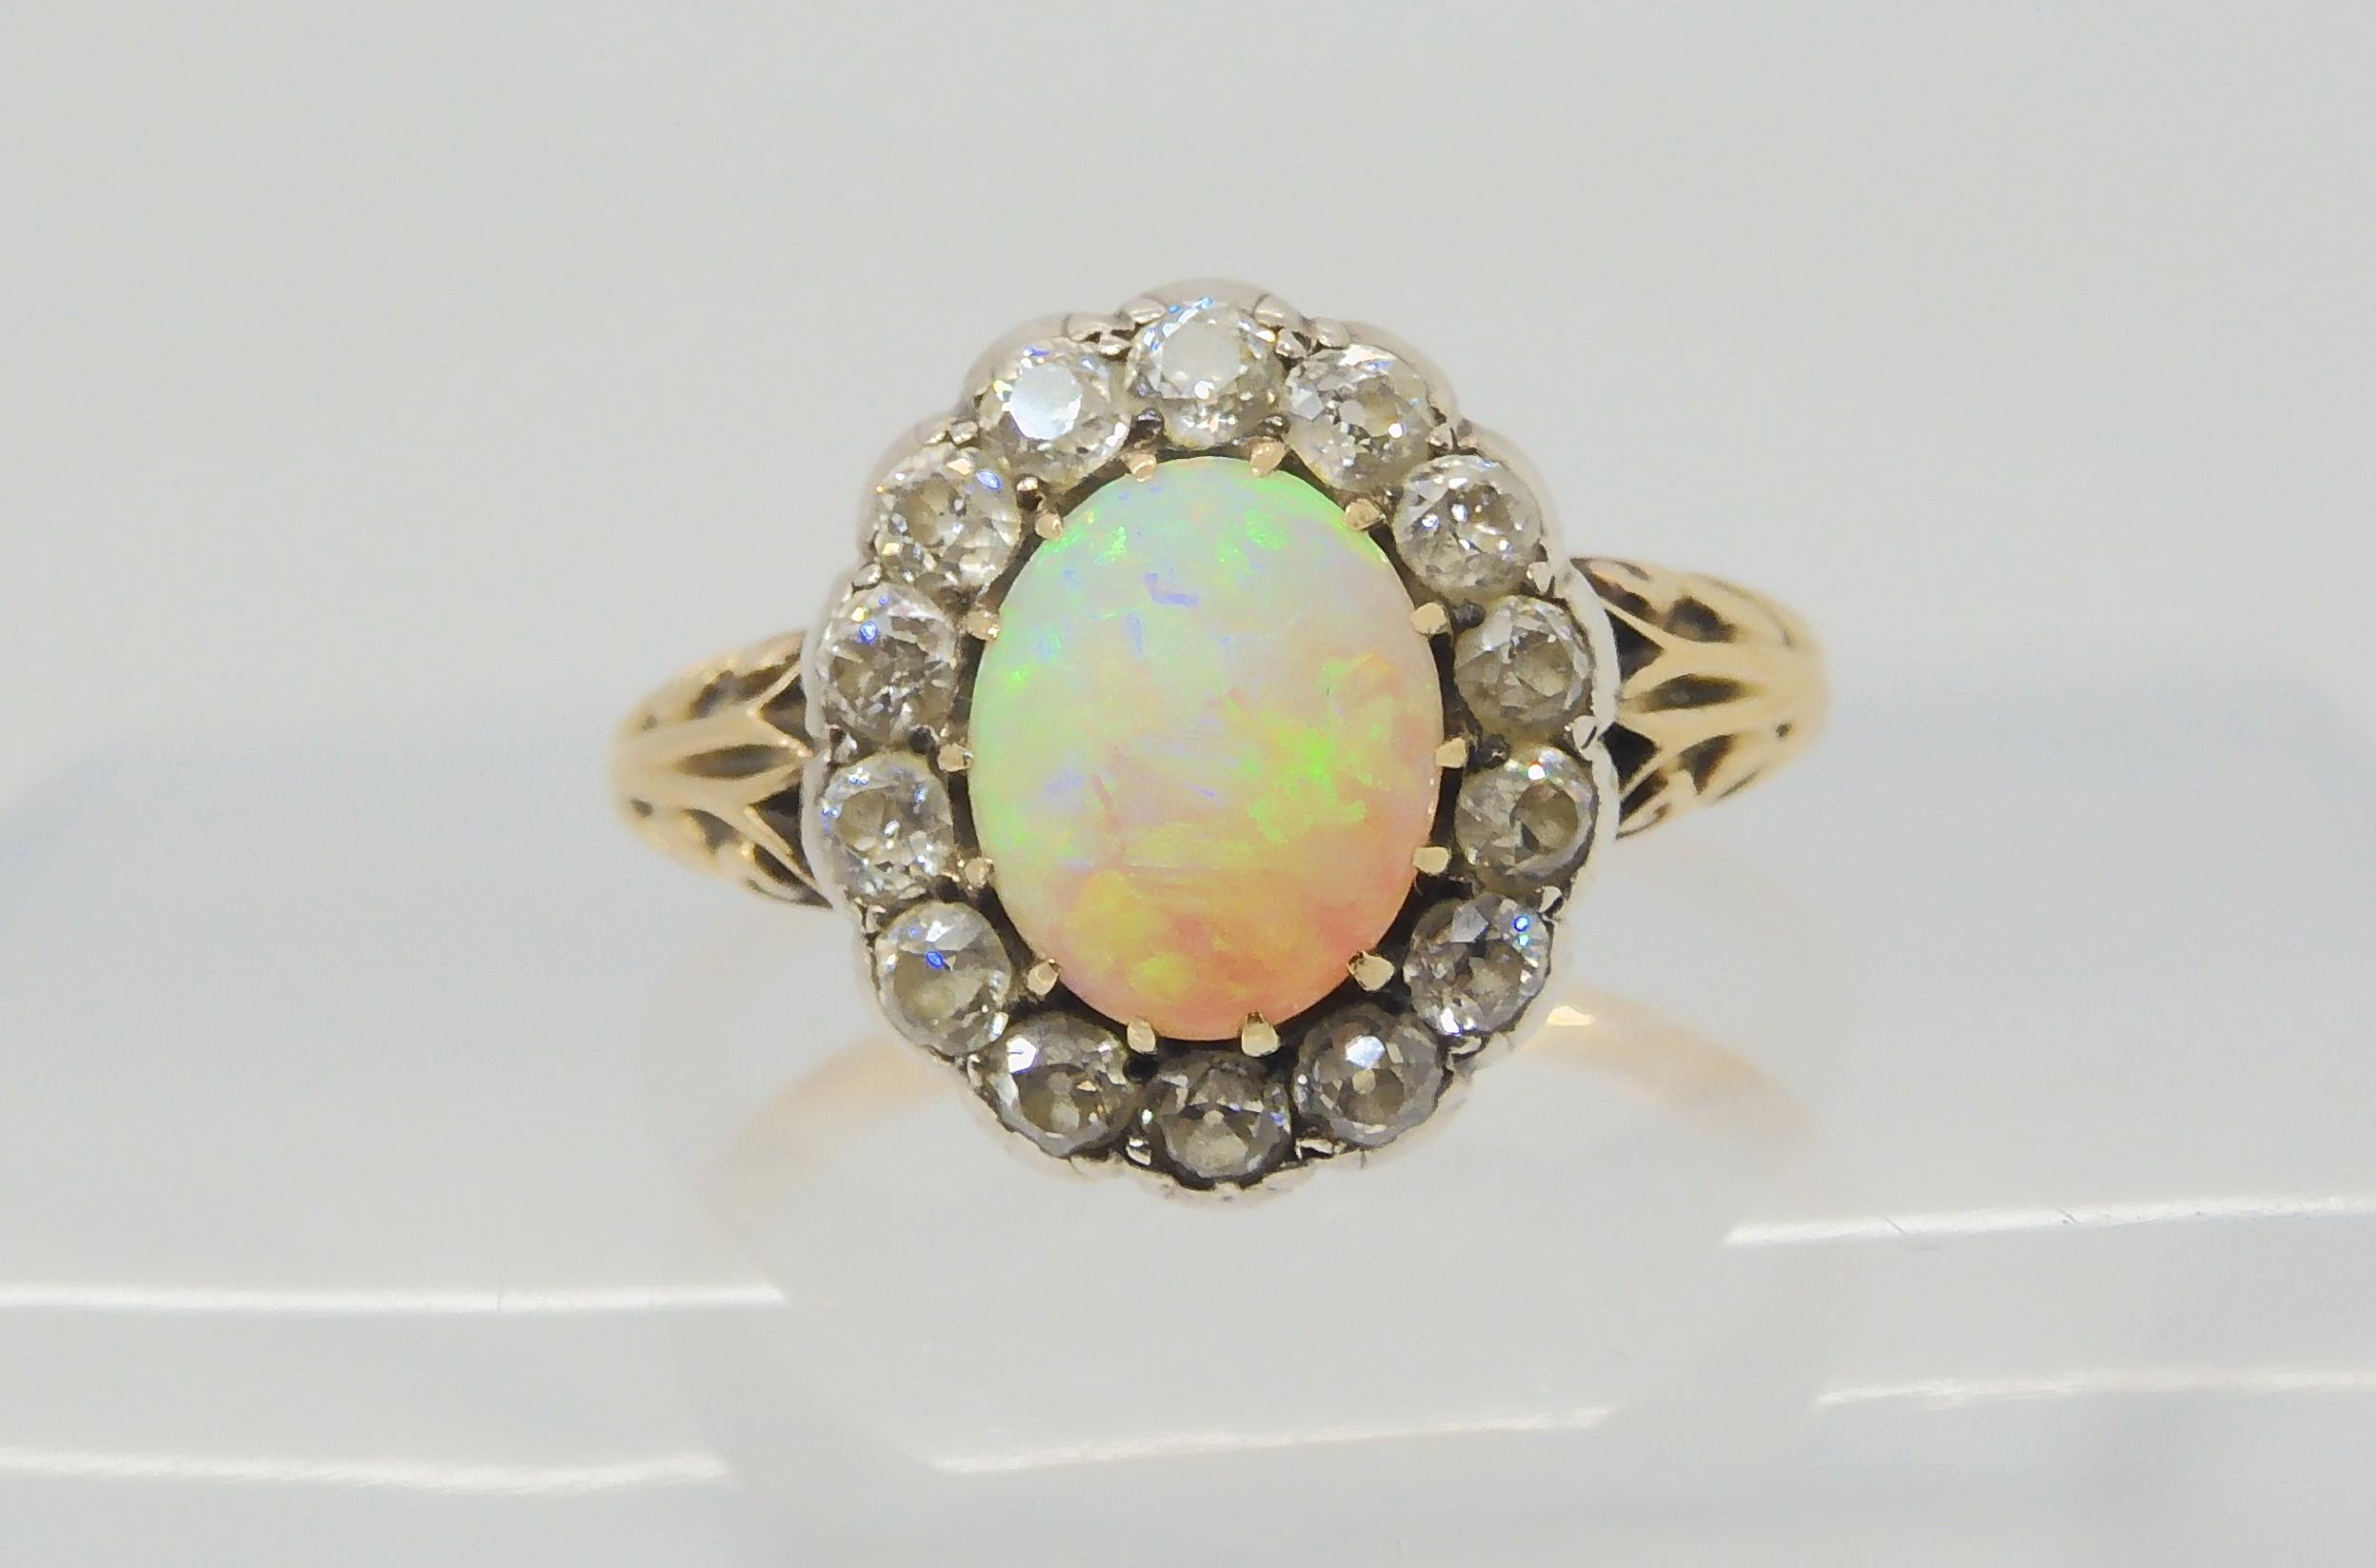 AN OPAL AND DIAMOND RING set with a high domed opal of approx 8.8mm x 7.1mm x 4.1mm, surrounded with - Image 2 of 5